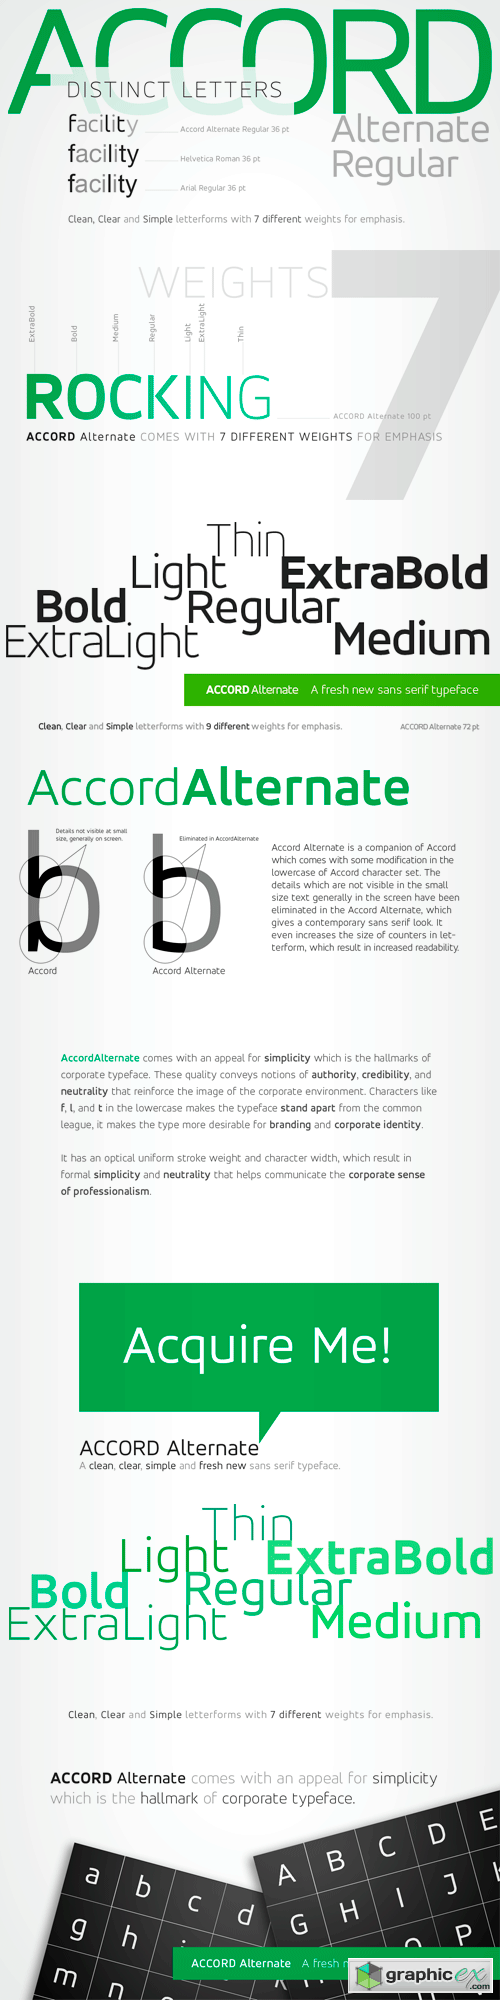 Accord Alternate Font Family - 7 Fonts for $336